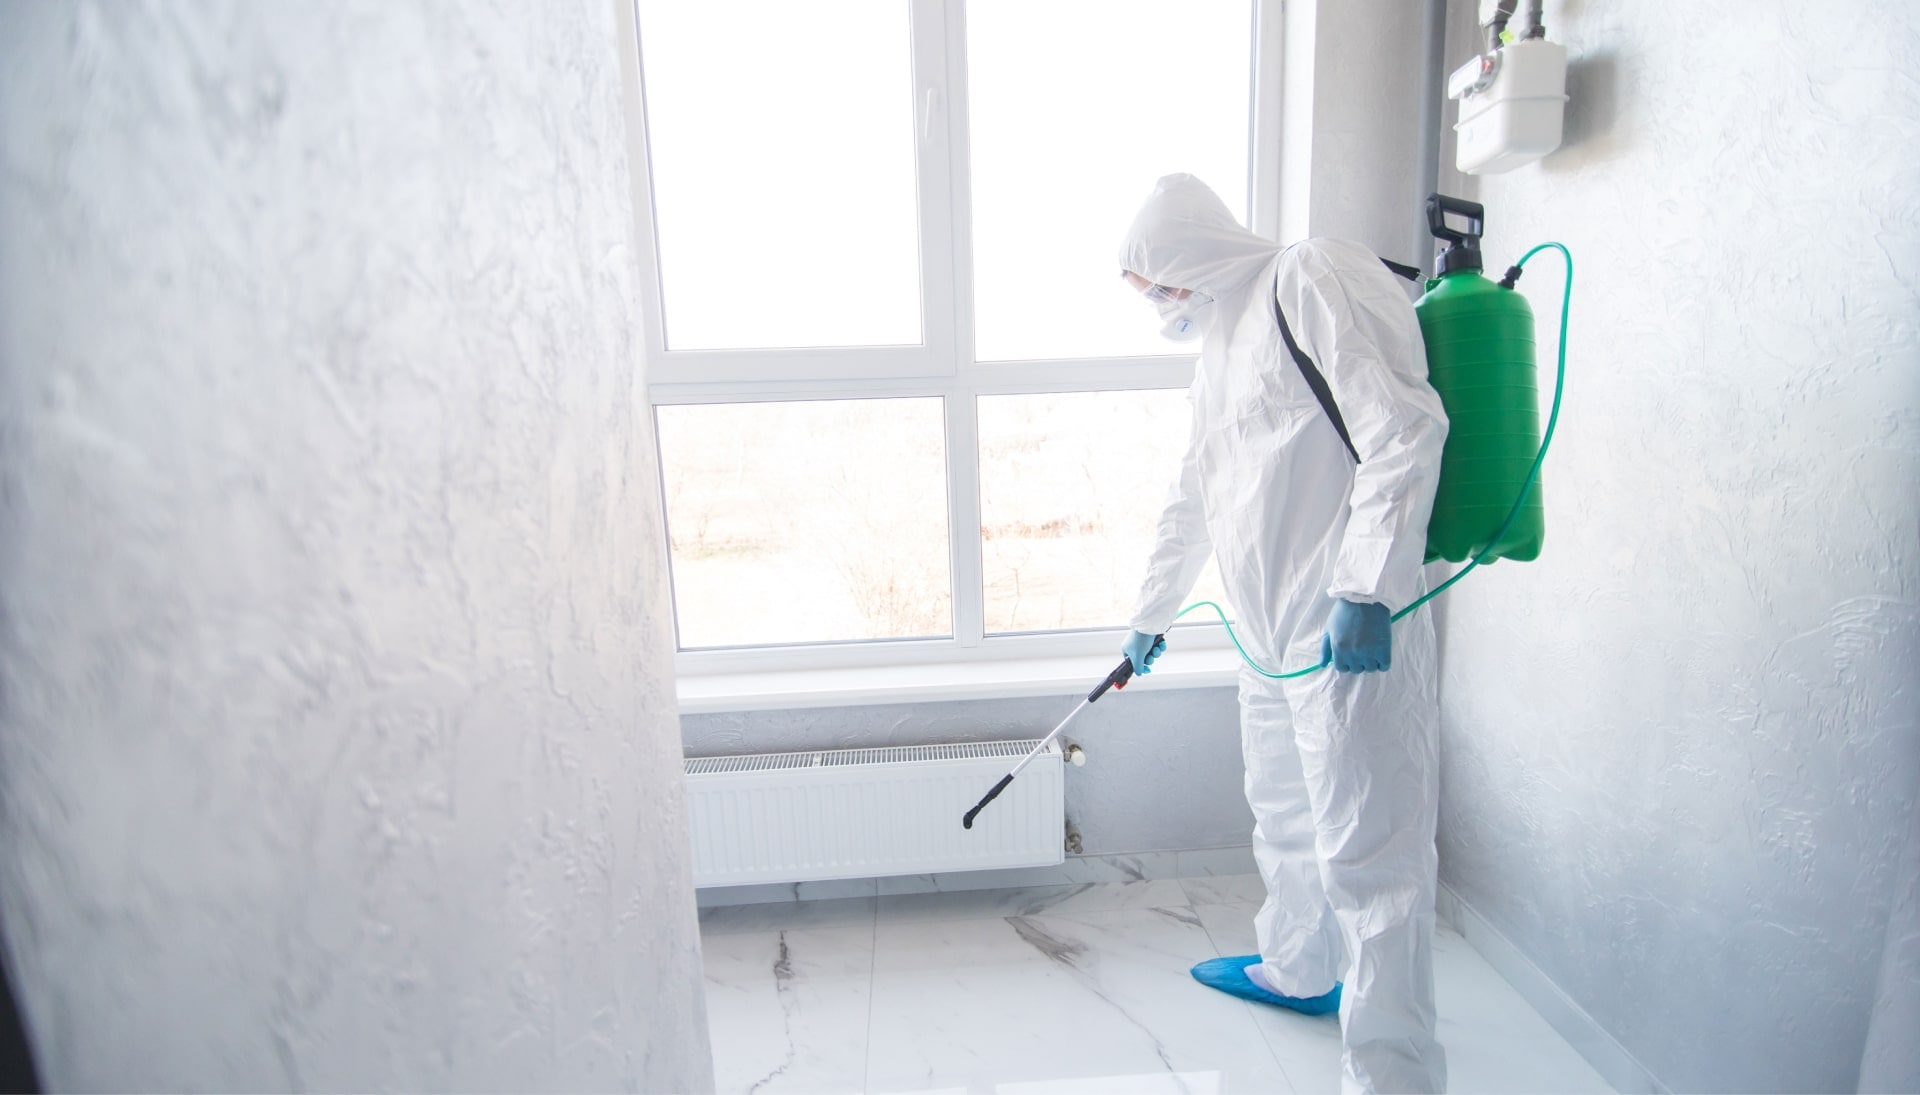 We provide the highest-quality mold inspection, testing, and removal services in the Kirby, Indiana area.